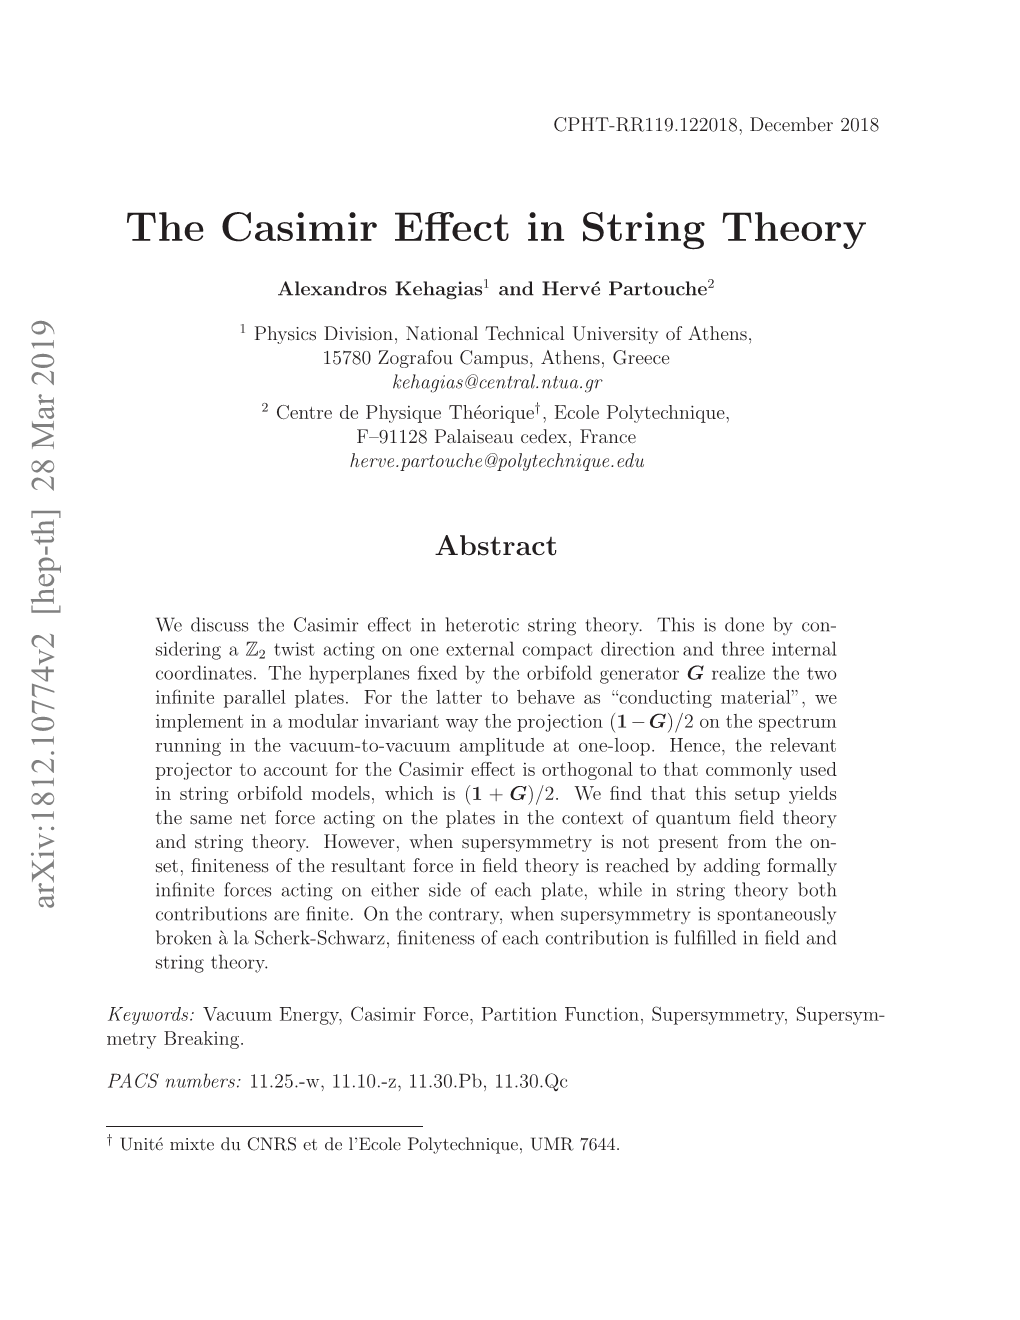 The Casimir Effect in String Theory